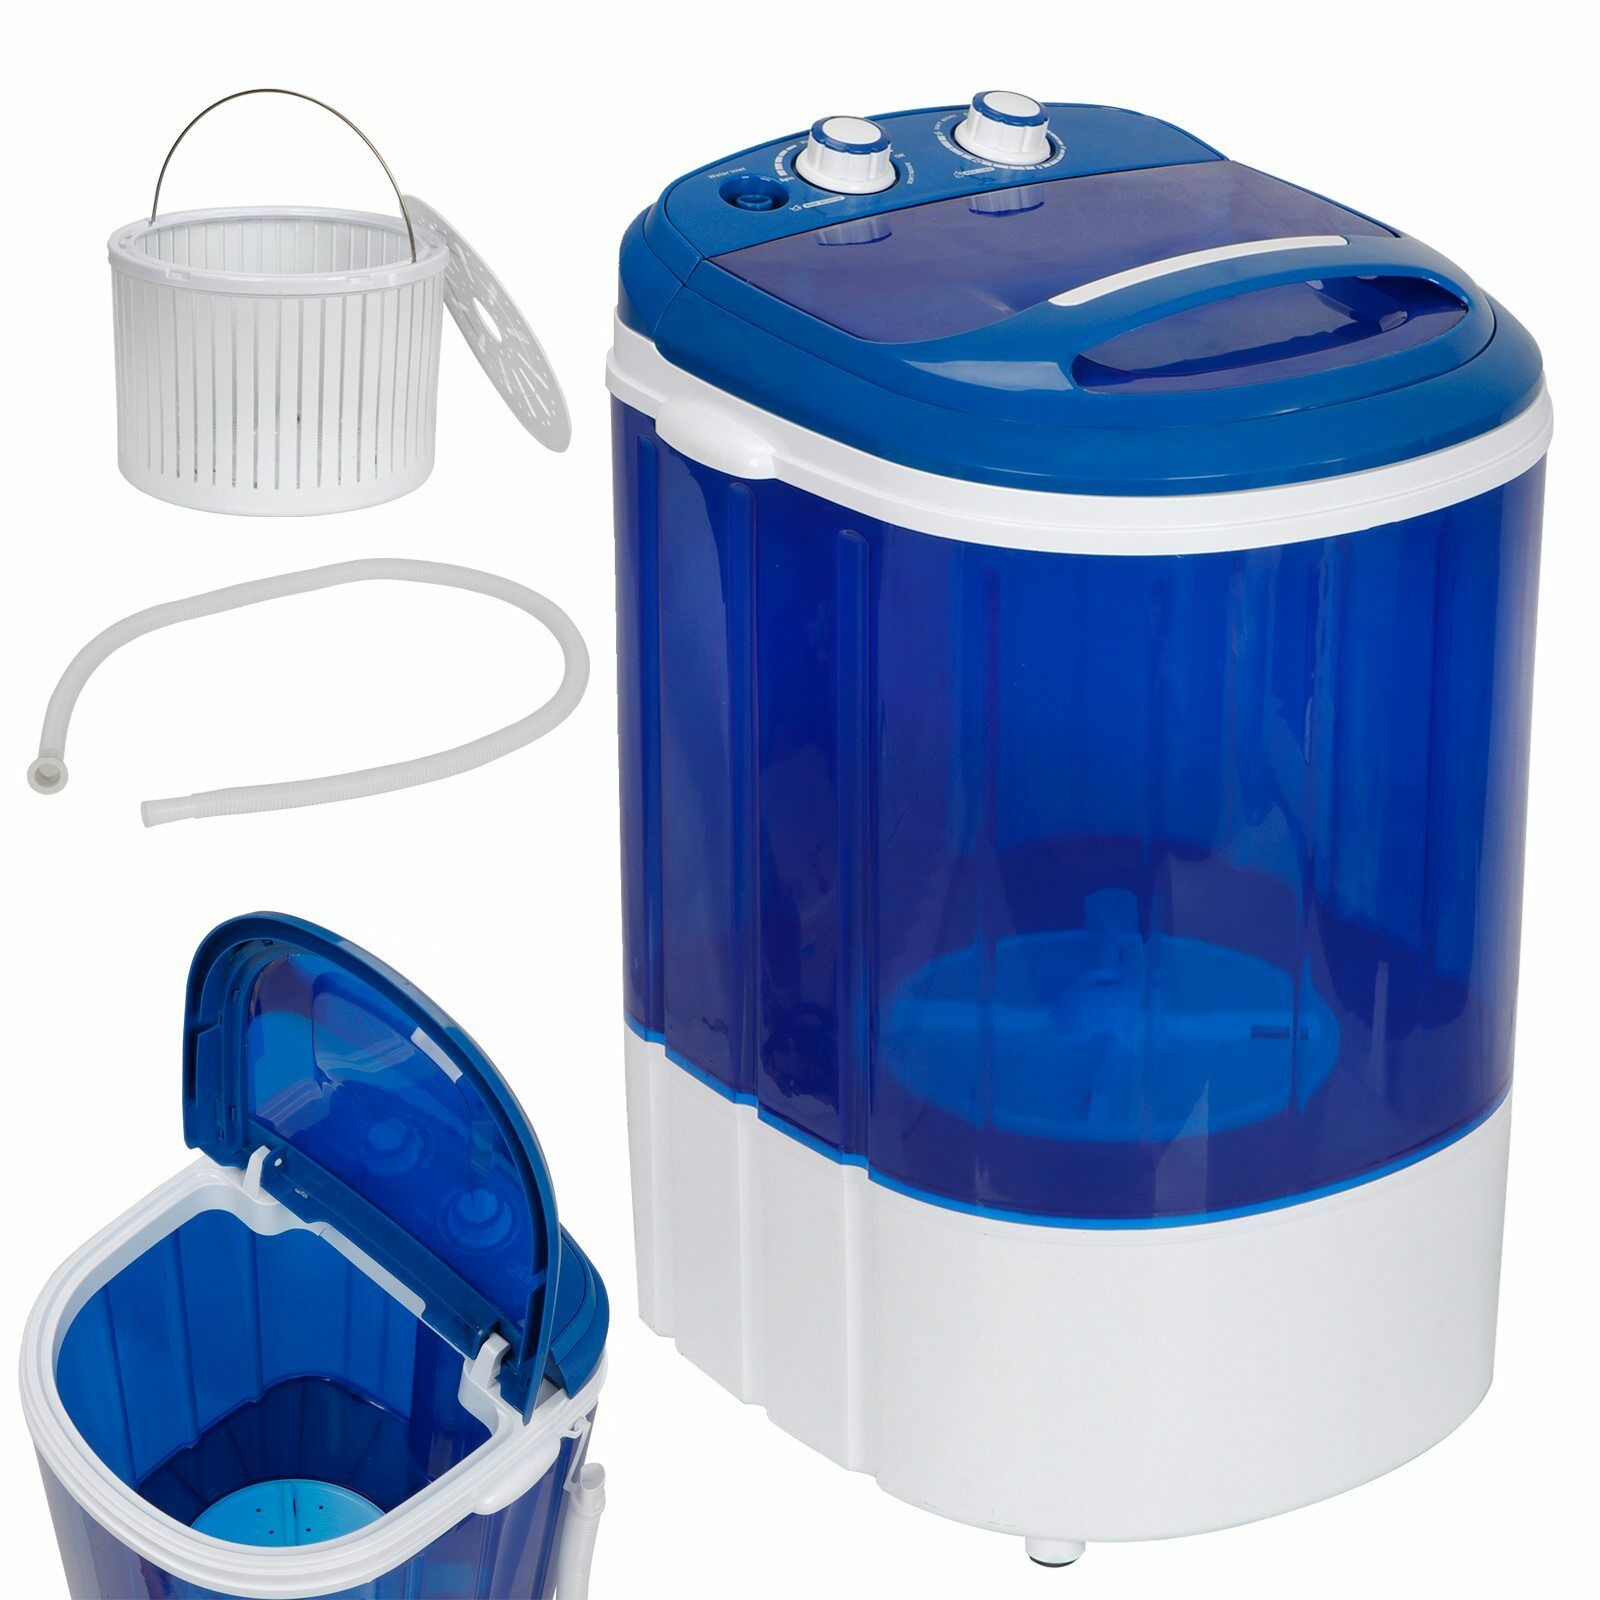 9 lbs Portable Compact Washing Machine Mini Laundry Washer Idea for Dorm Rooms